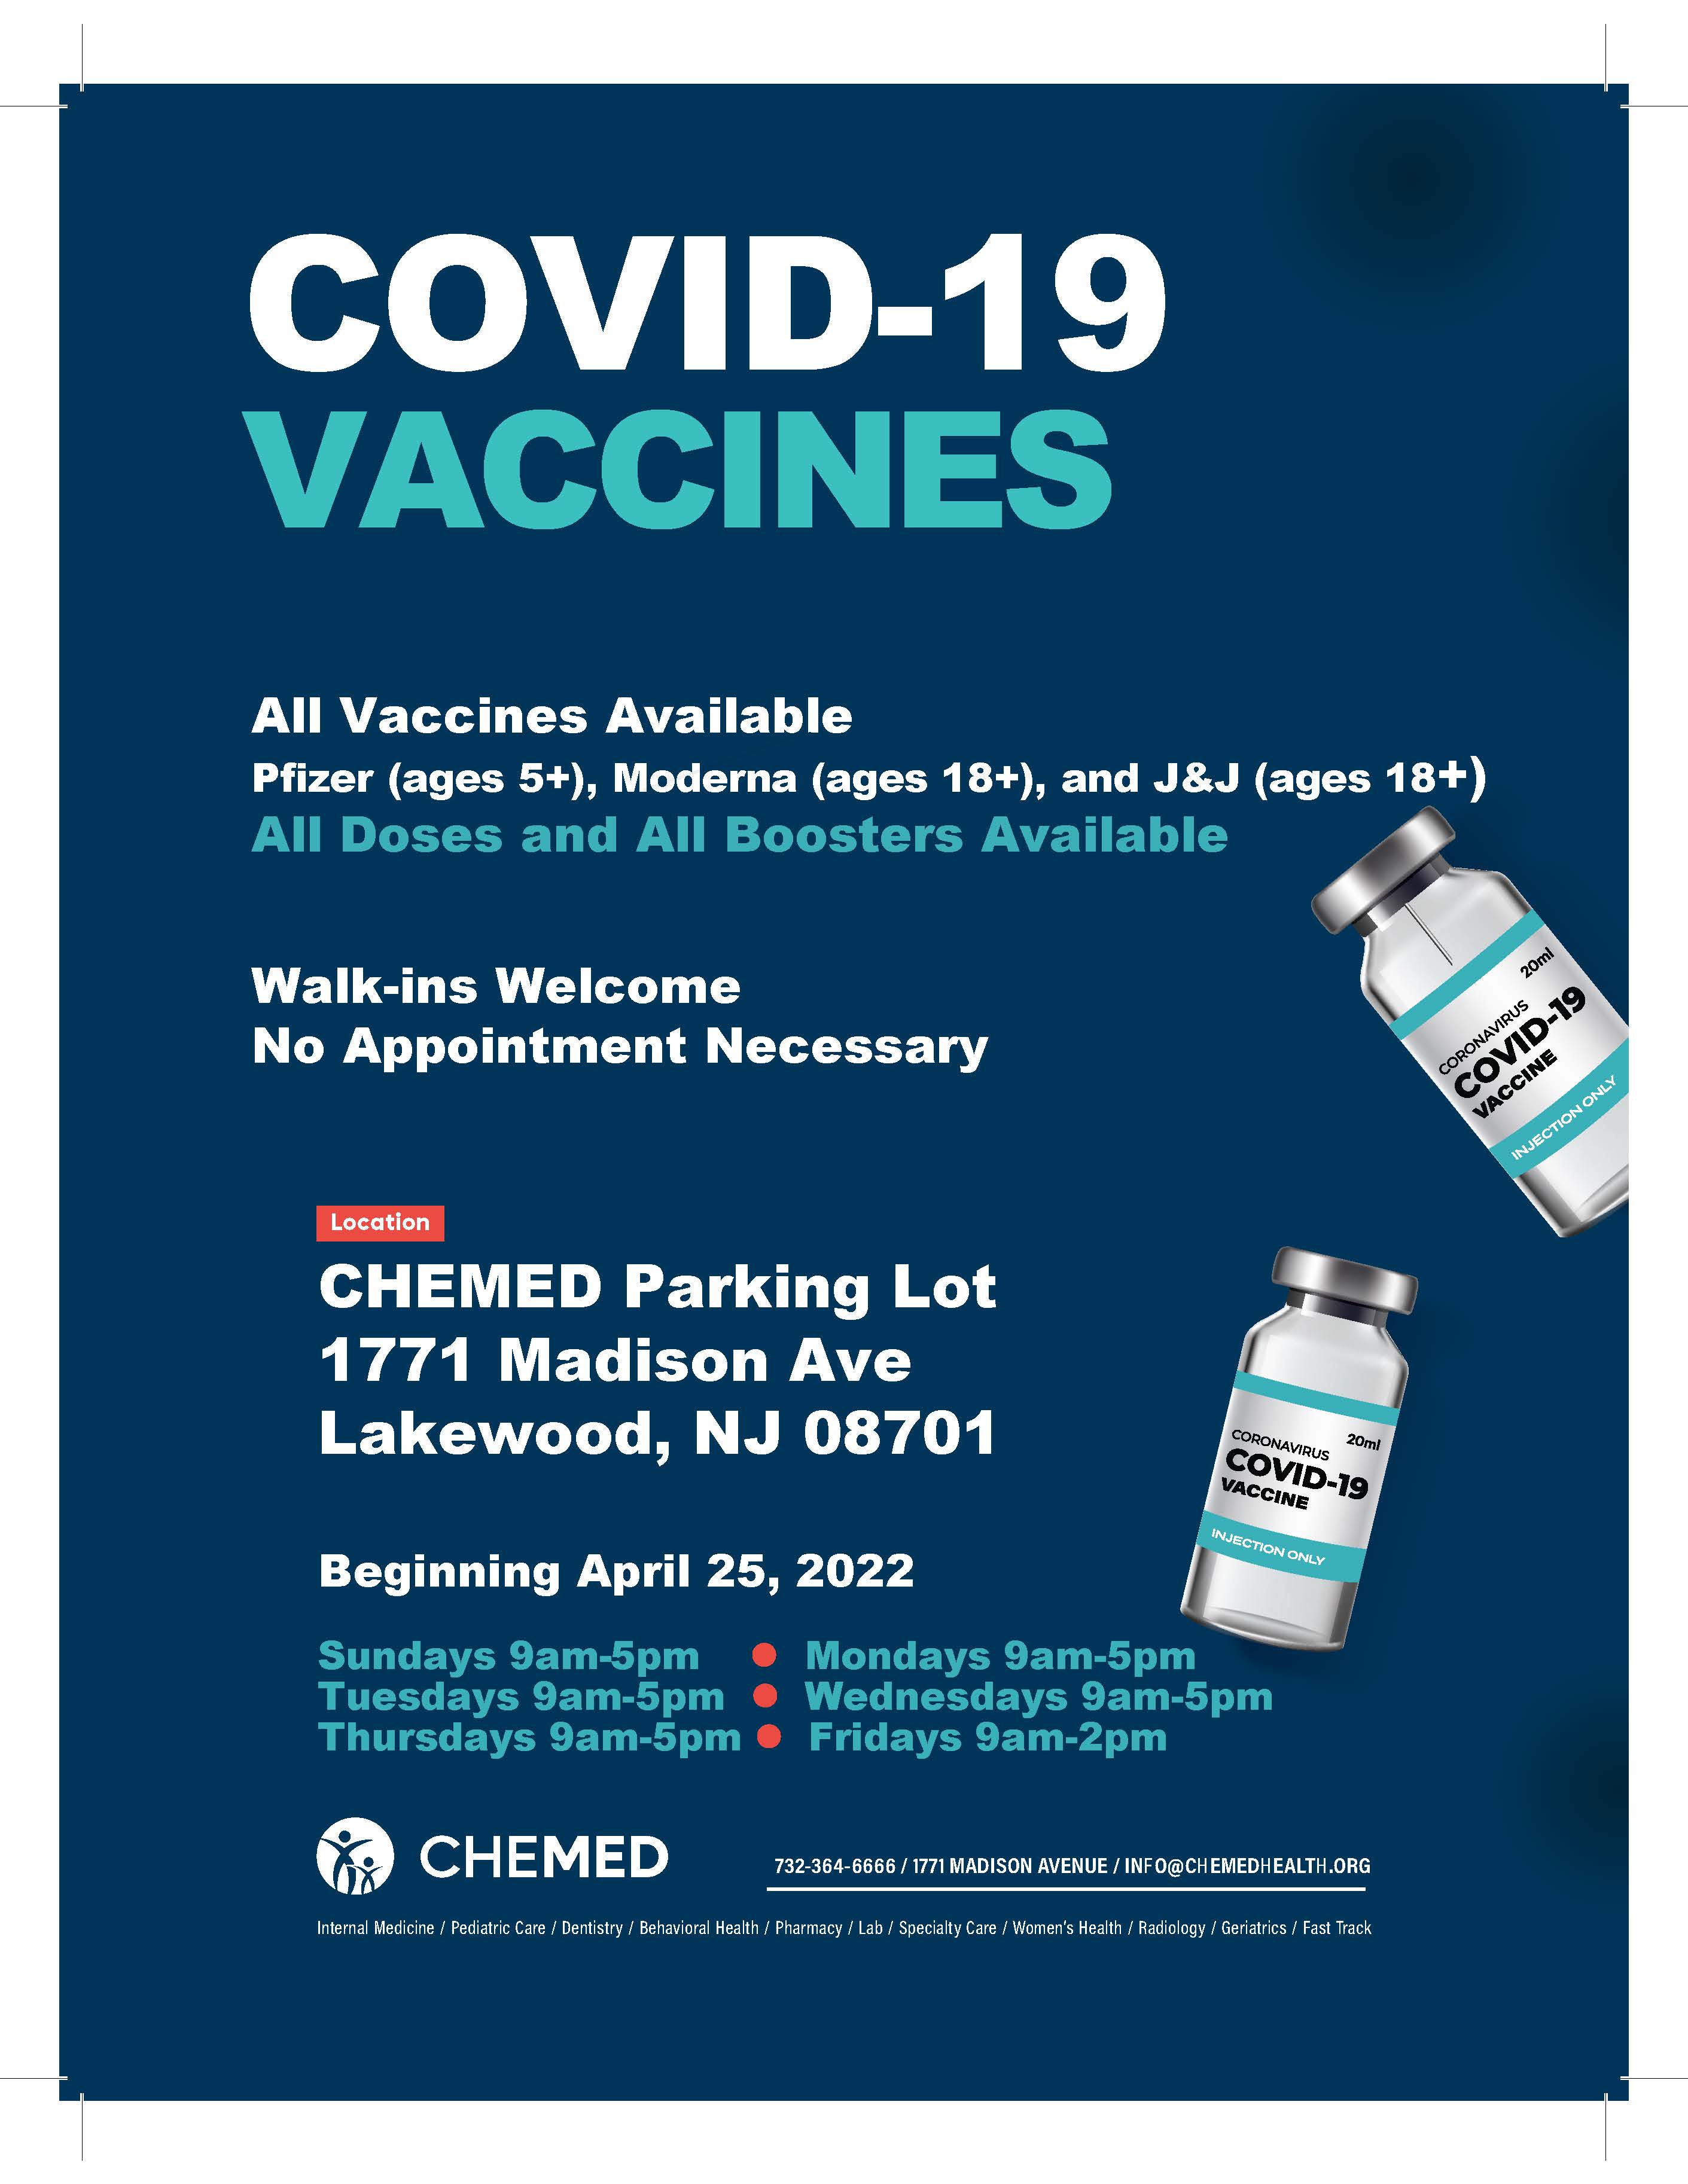 COVID VACCINE SCHEDULING INFORMATION